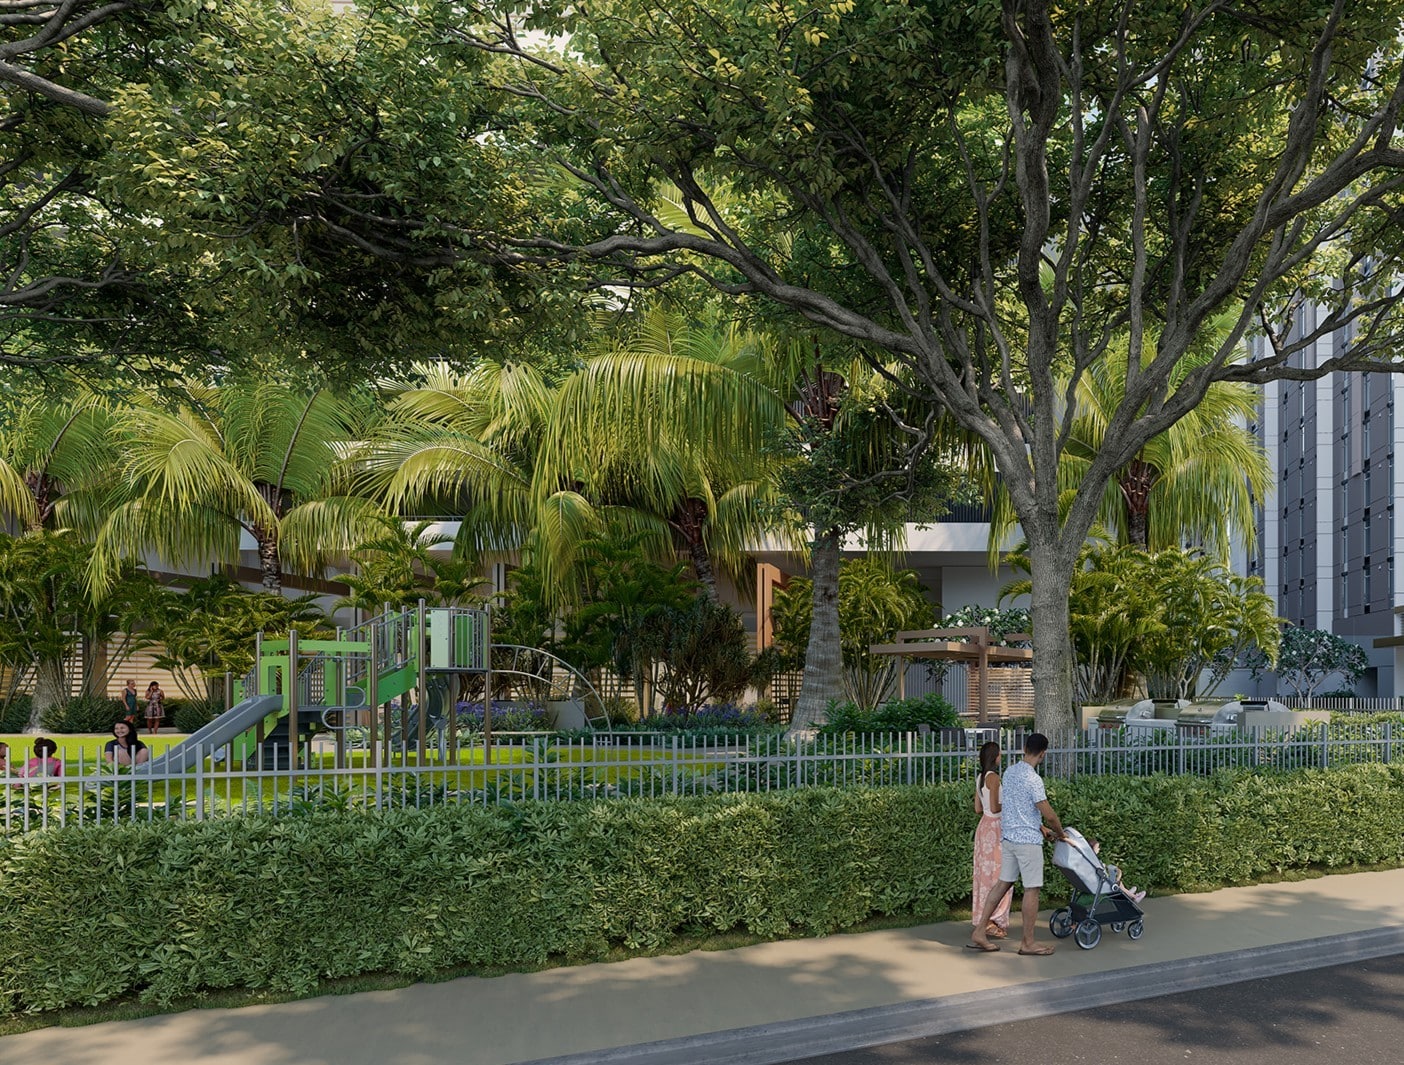 Spacious parks surround Ulana Ward Village, weaving nature into everyday life. Relax and reconnect at various open-air green spaces including Ulana Lawn, future planned Ka La‘i o Kukuluāe‘o park, and the nearby Victoria Ward Park. Learn more about the current and future neighborhood parks on our website. https://www.wardvillage.com/explore/